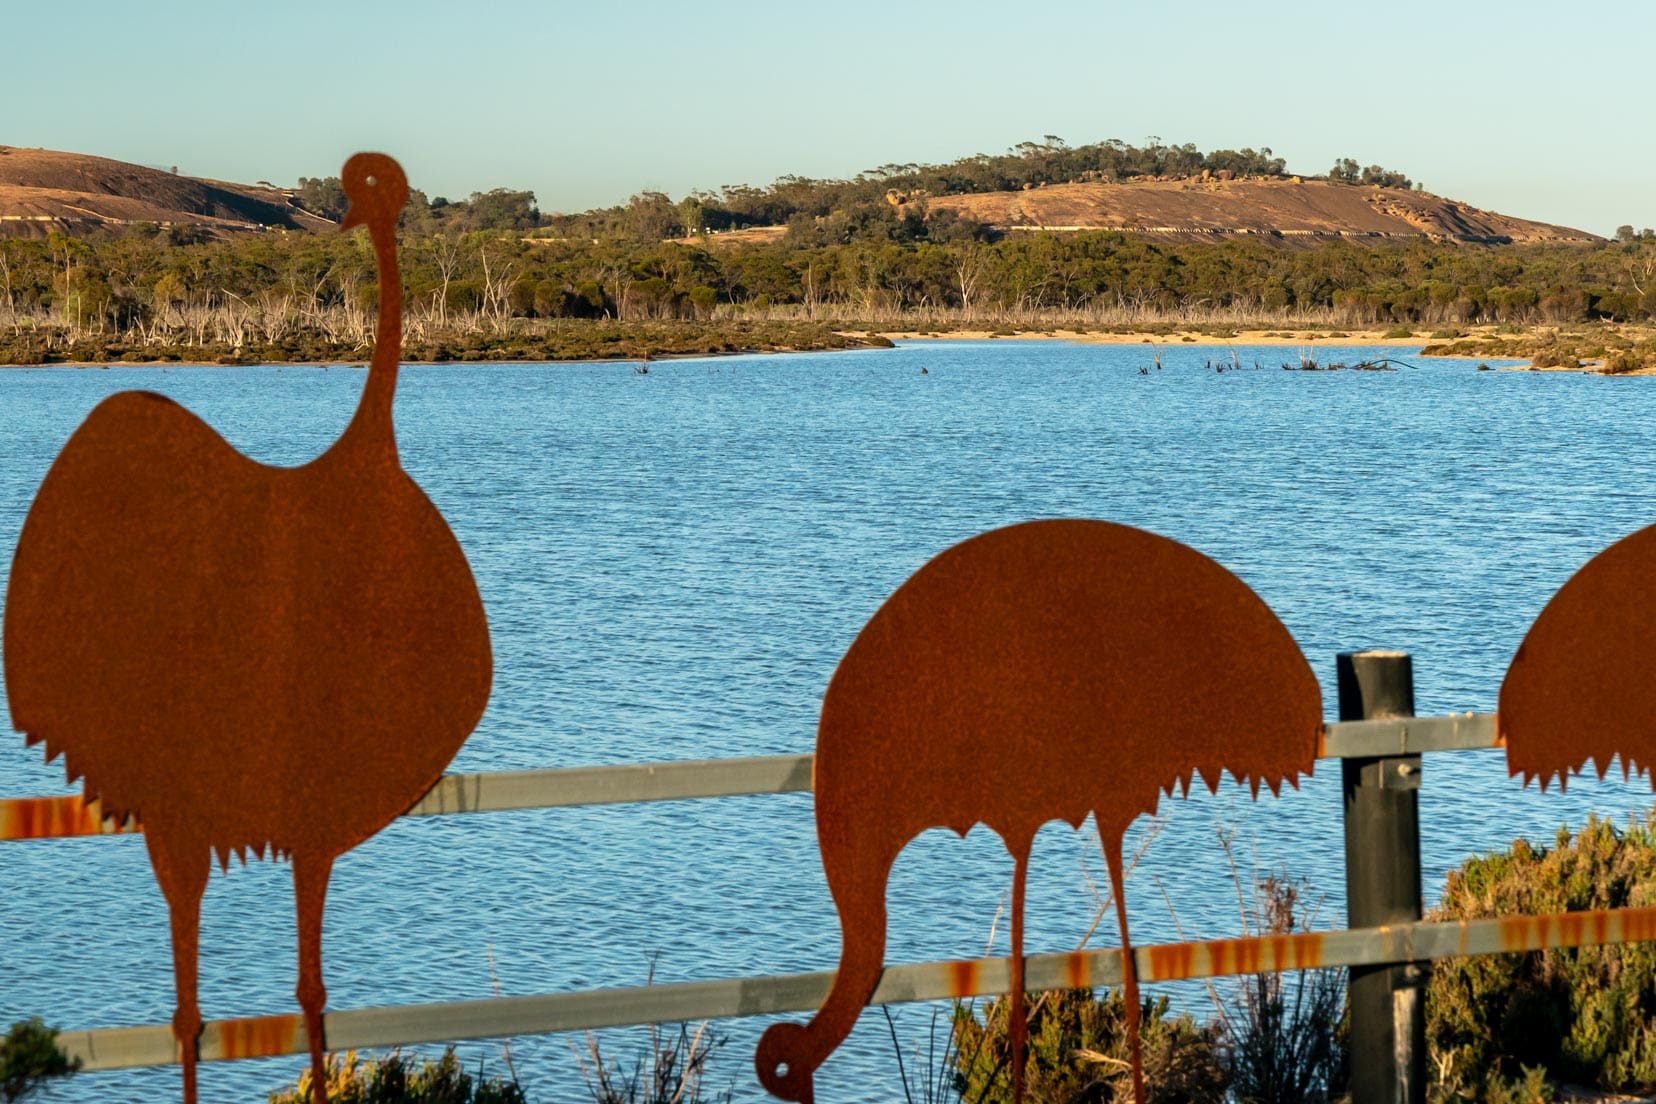 Perth to Wave Rock Lake-Magic-and-salt-pool,-resort with emu metal cutouts on a fence bordering the lake